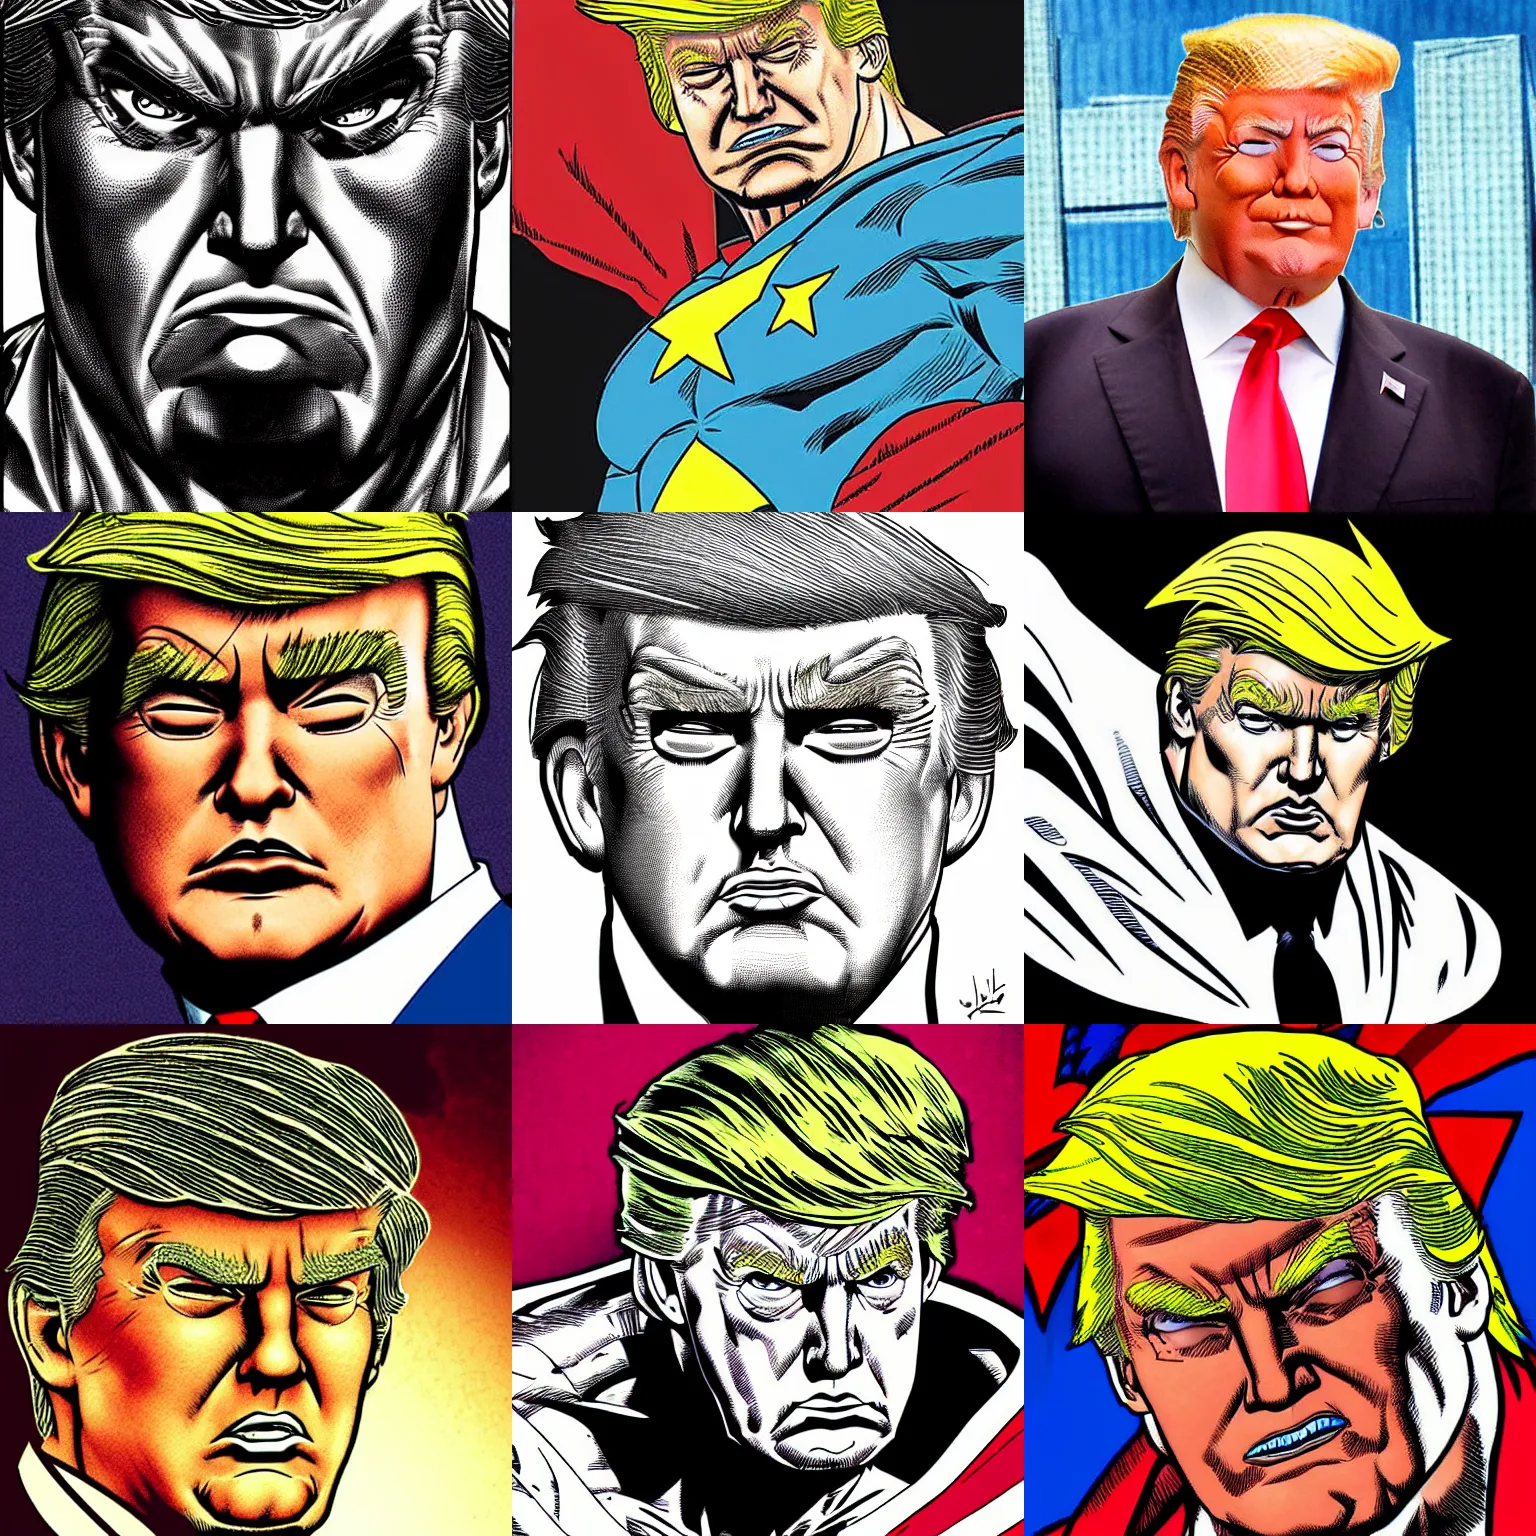 Prompt: jim lee style!!! close up headshot of donald trump as superhero in the style of jim lee, comic book drawing by jim lee